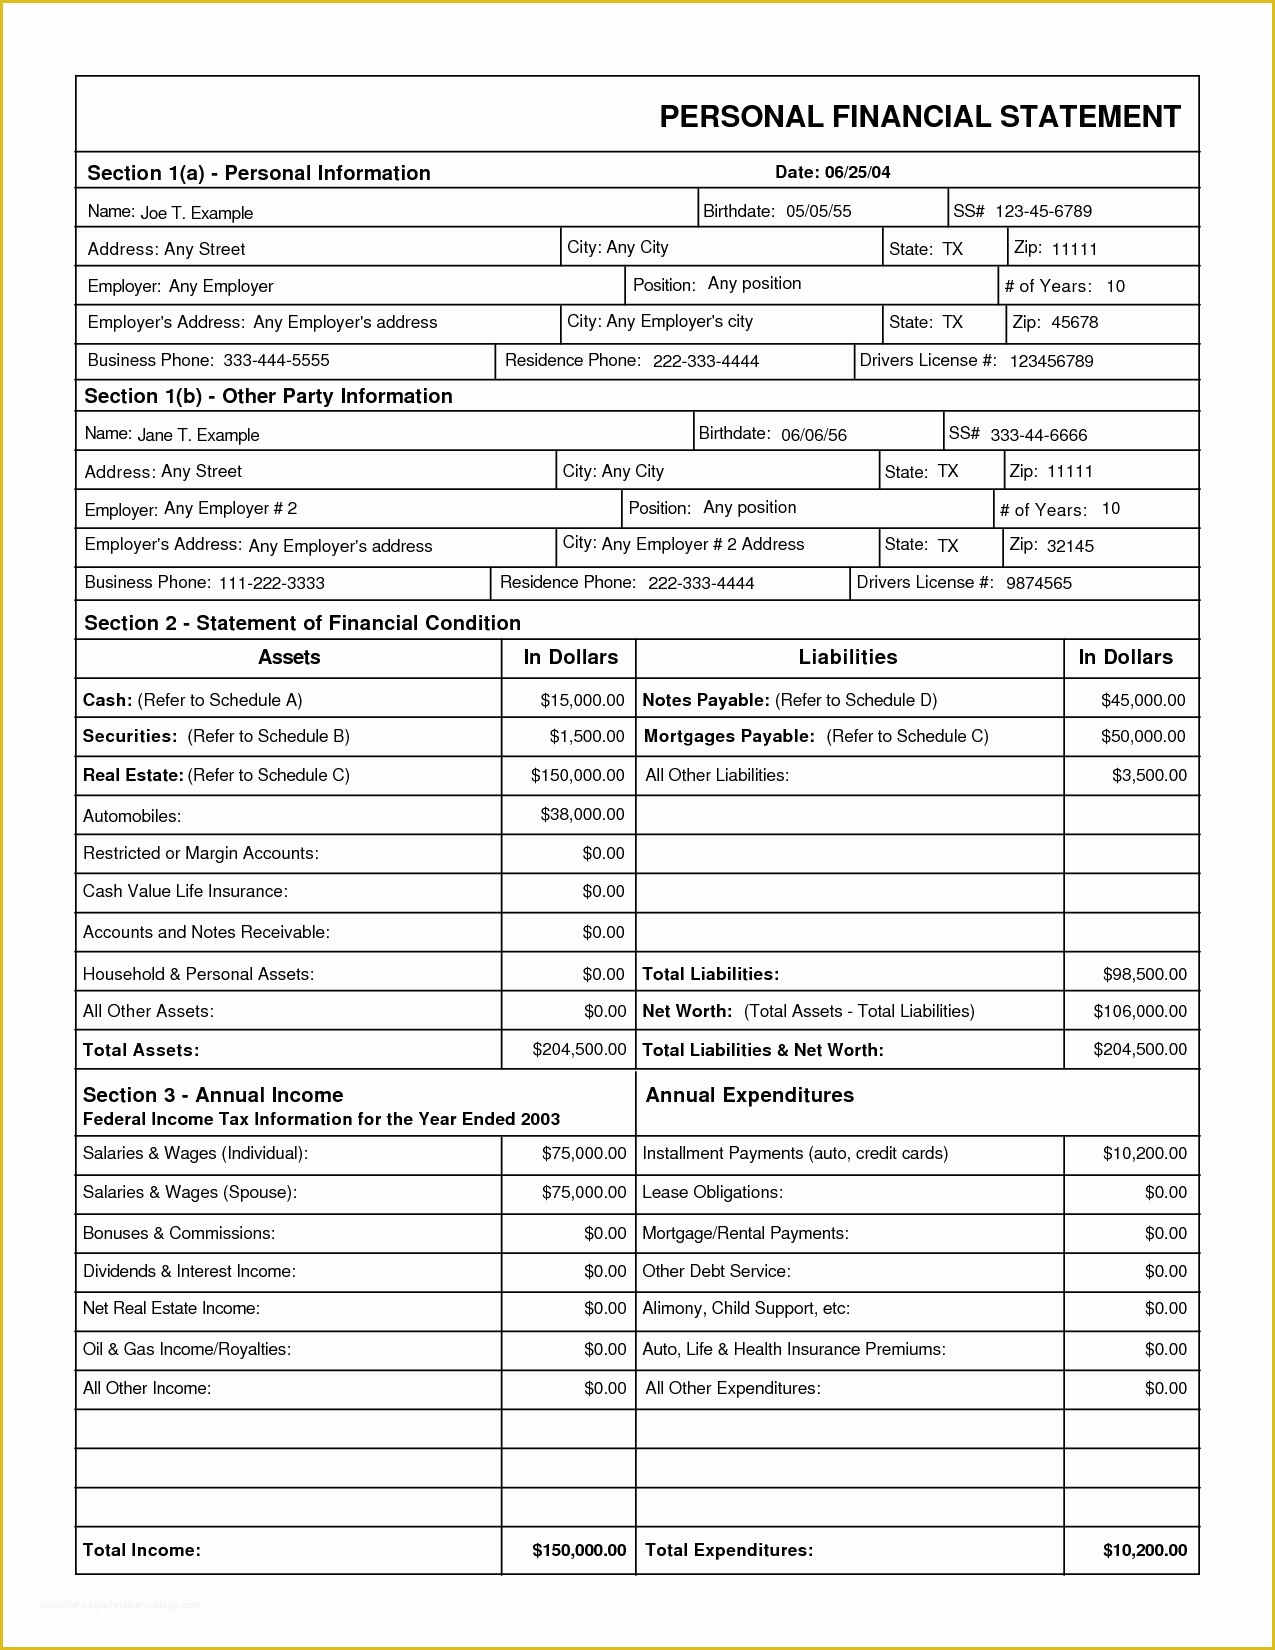 Personal Income Statement Template Free Of Wells Fargo Personal Financial Statement forms Reportd24